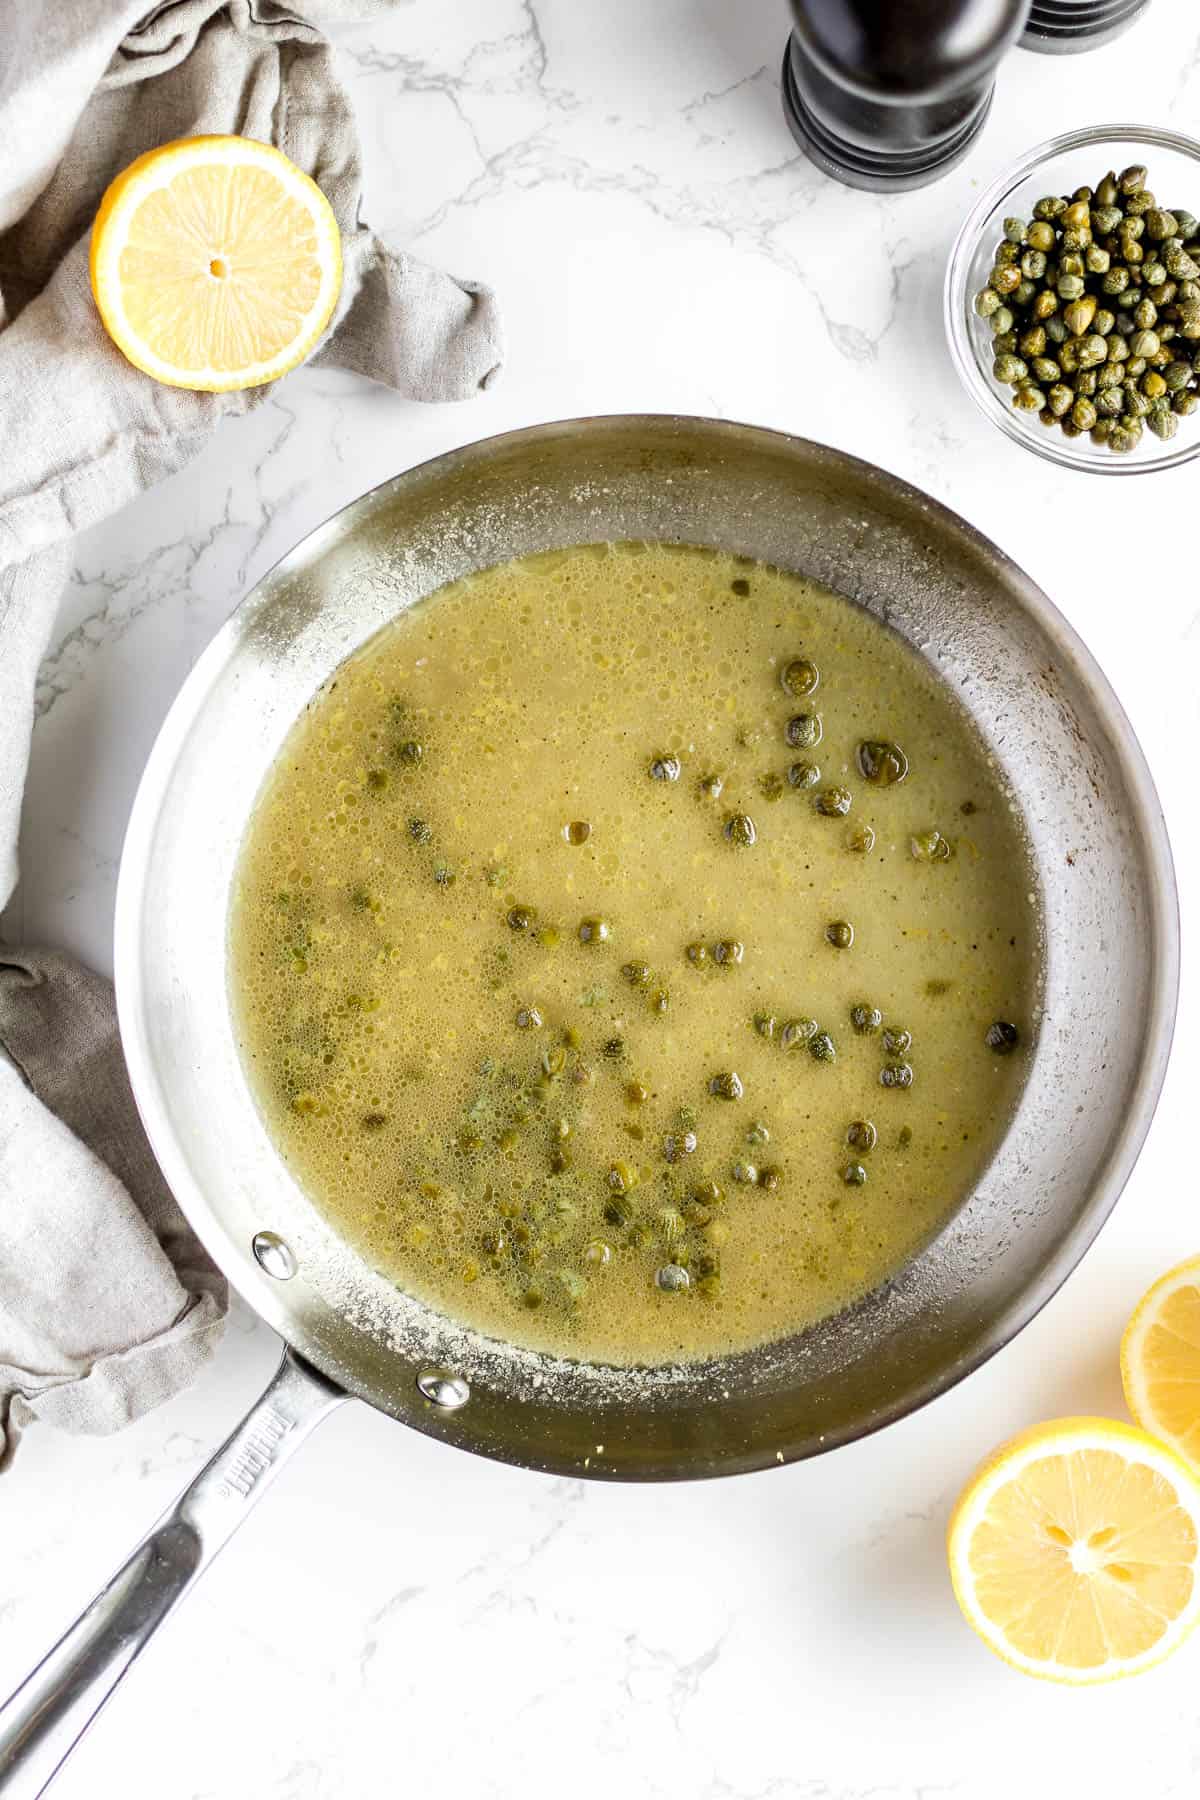 Piccata sauce with butter, lemon juice, and capers.